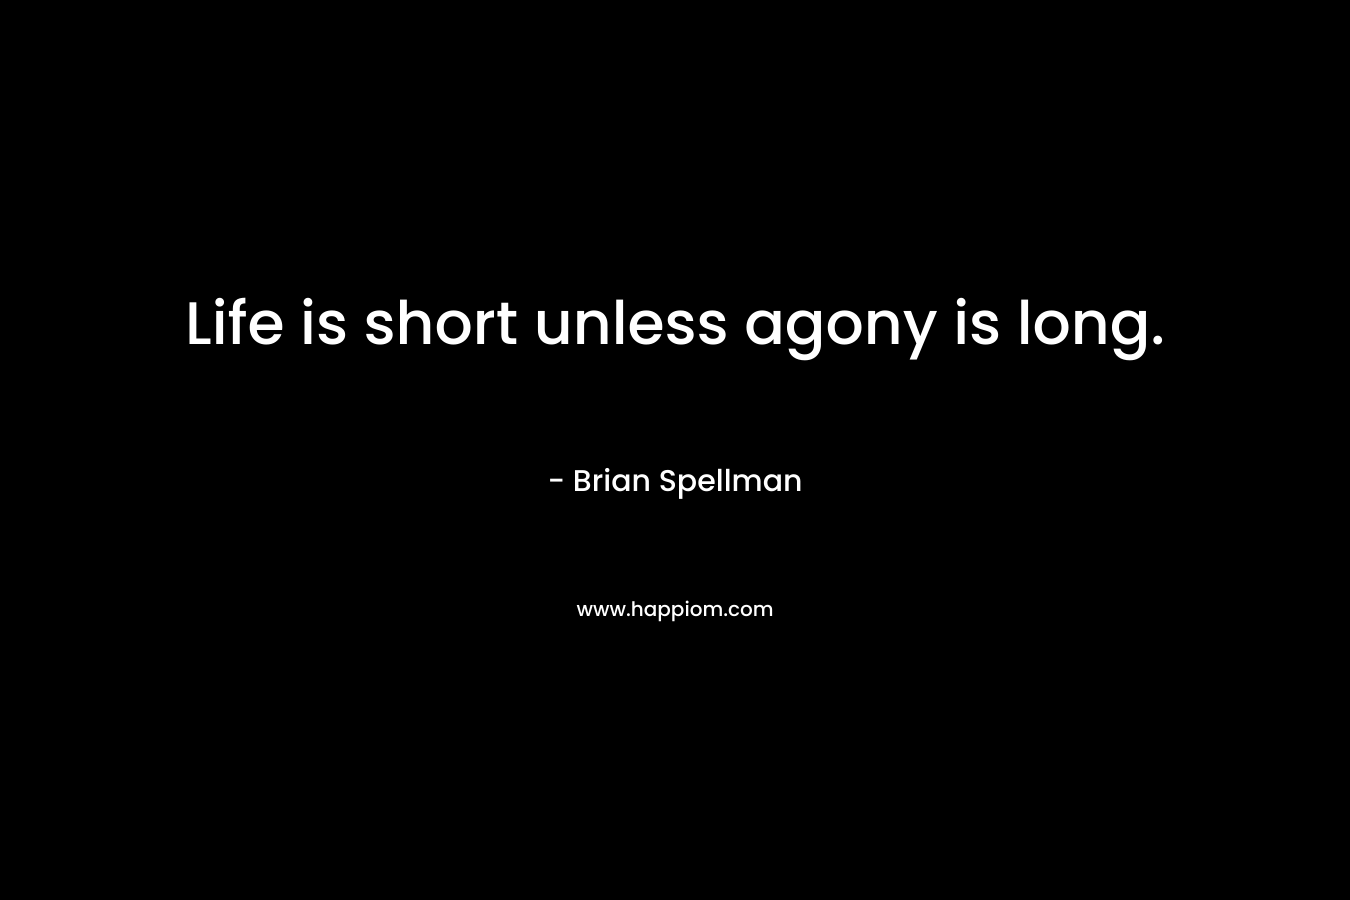 Life is short unless agony is long.